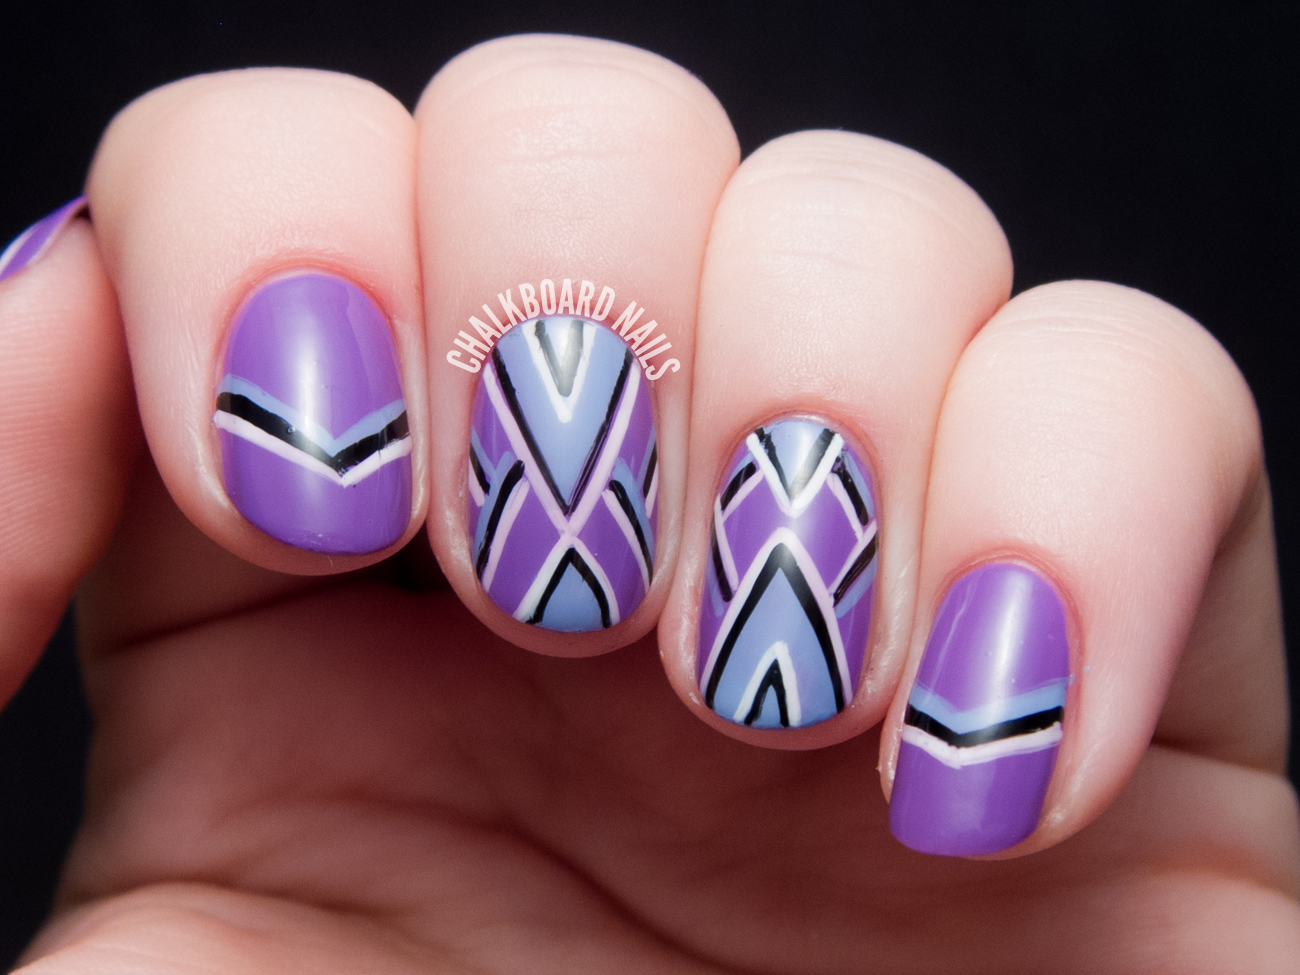 4. DIY Chevron Nails Without Tape - wide 2